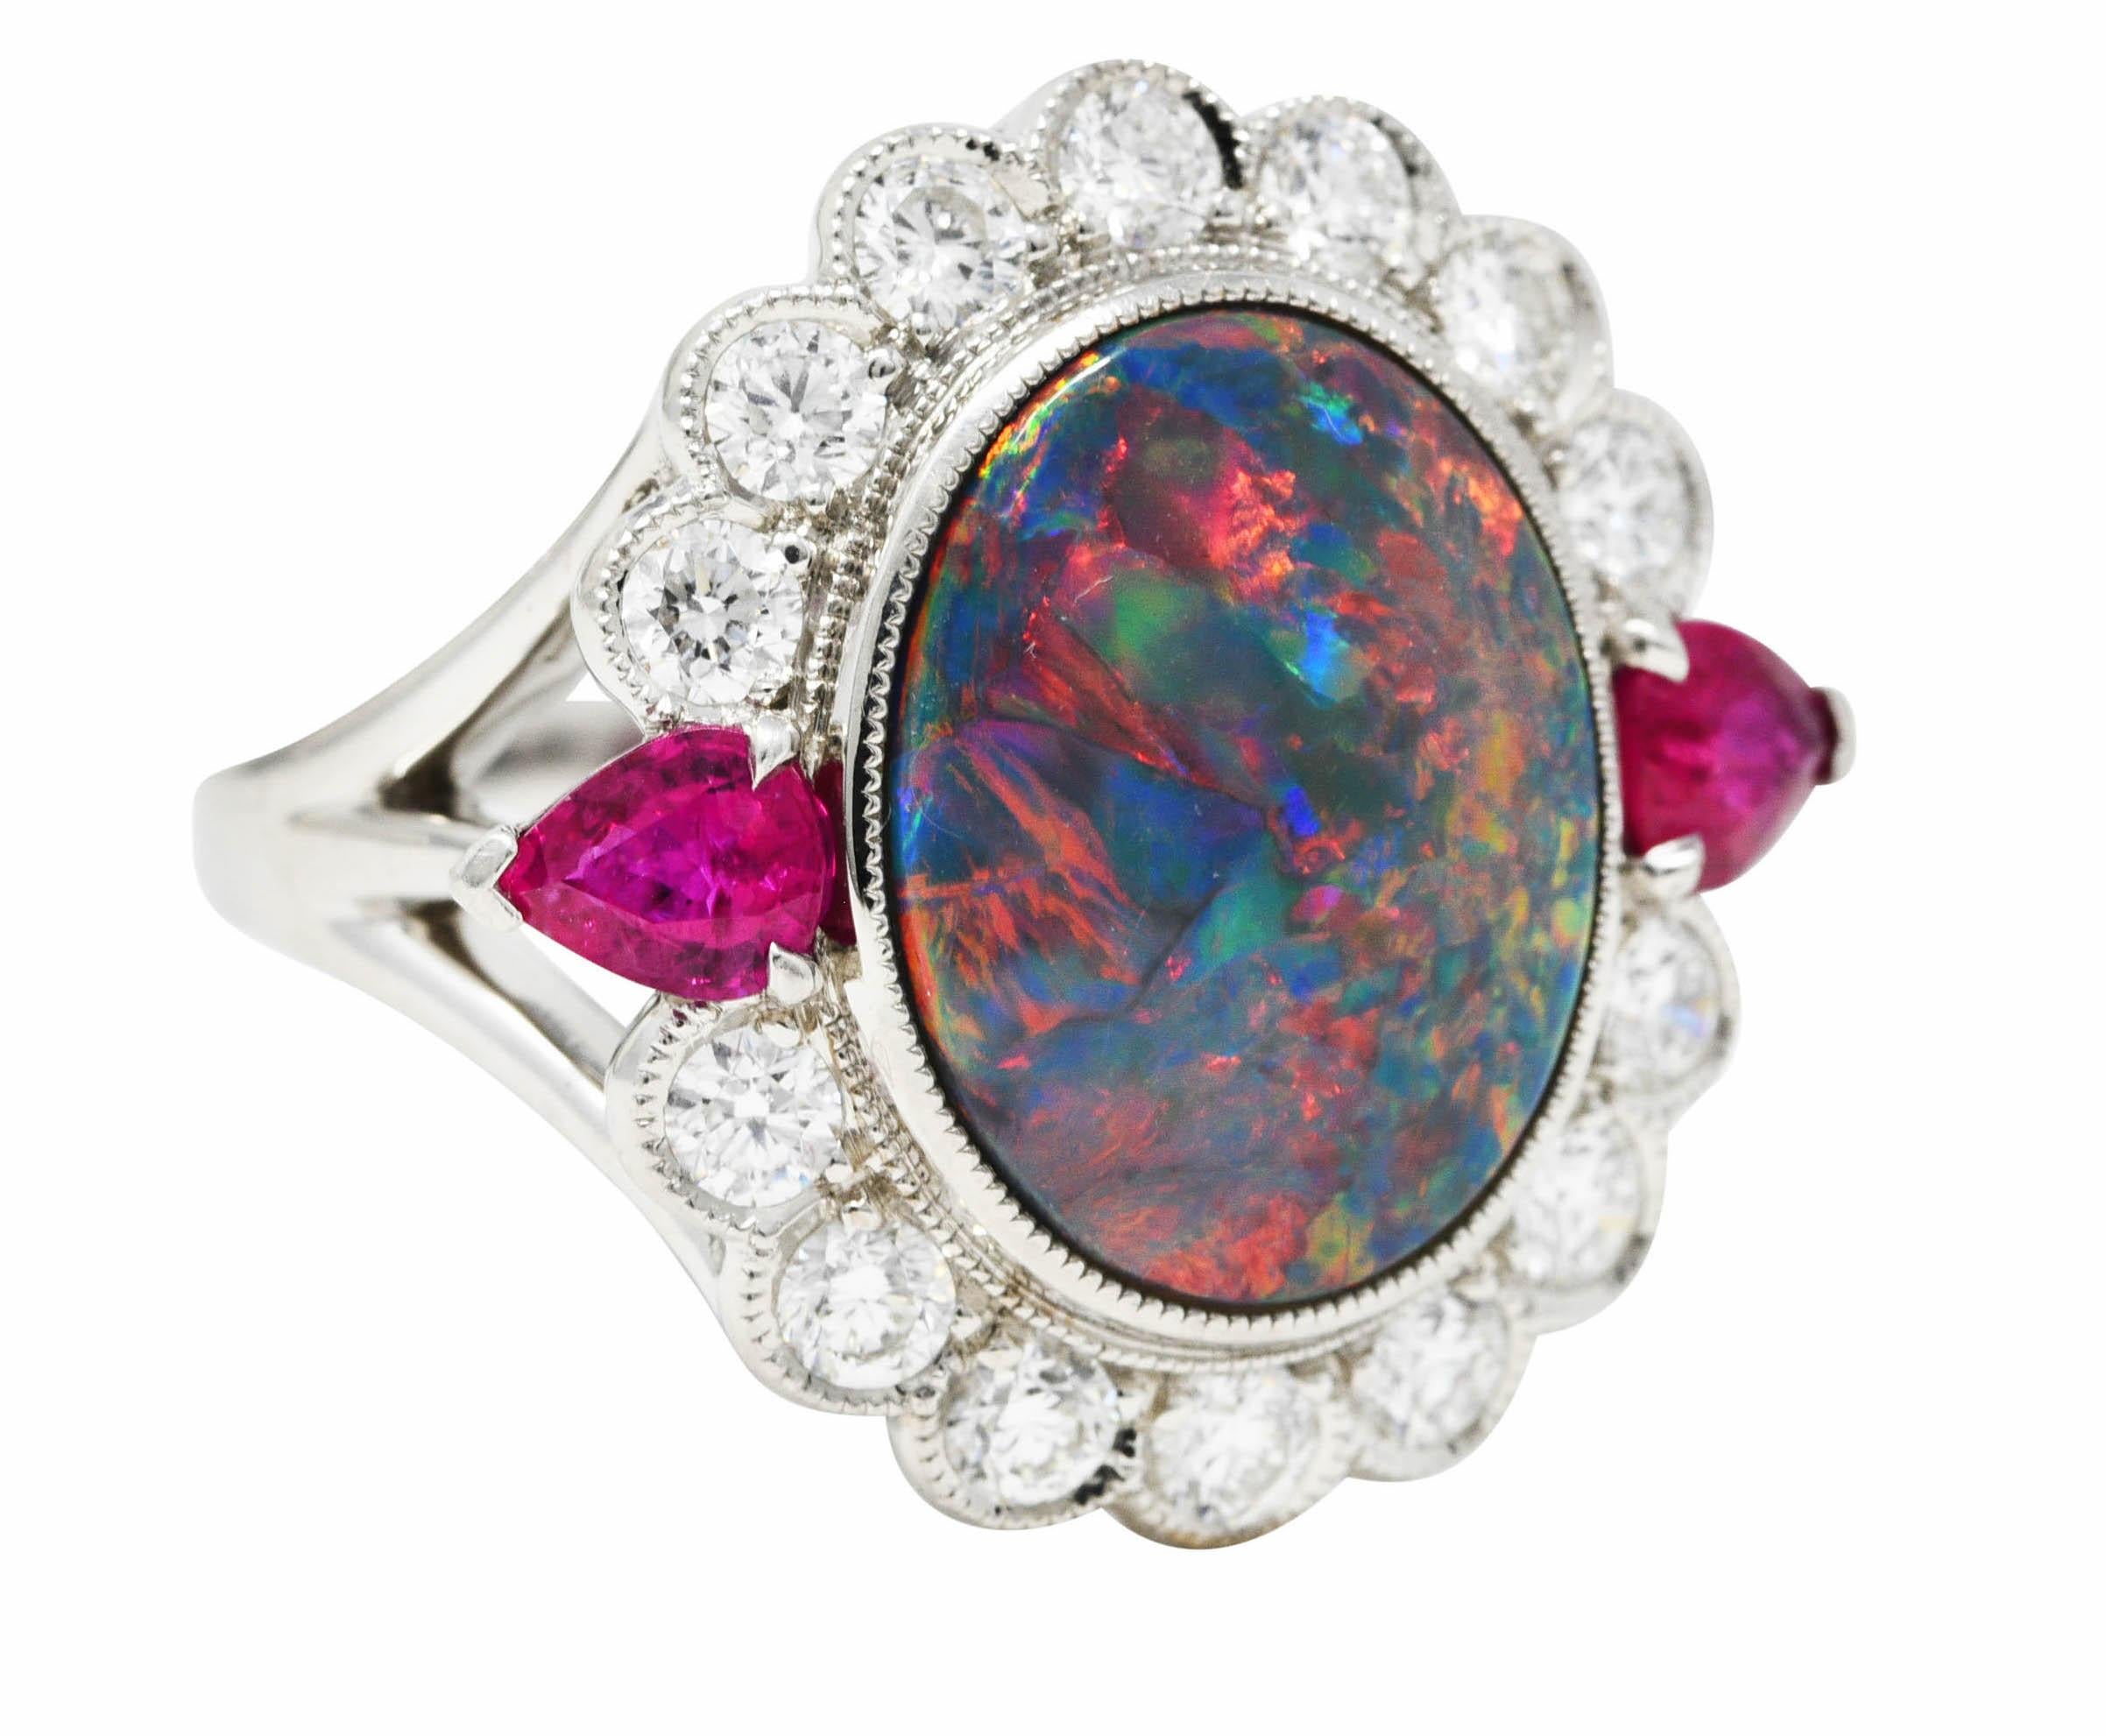 Statement cluster features on oval black opal cabochon measuring approximately 15.0 x 11.8 mm. Opaque dark body color and very strong spectral play-of-color with broad flashes intermittent by pinfire. Bezel set and flanked by two pear cut rubies